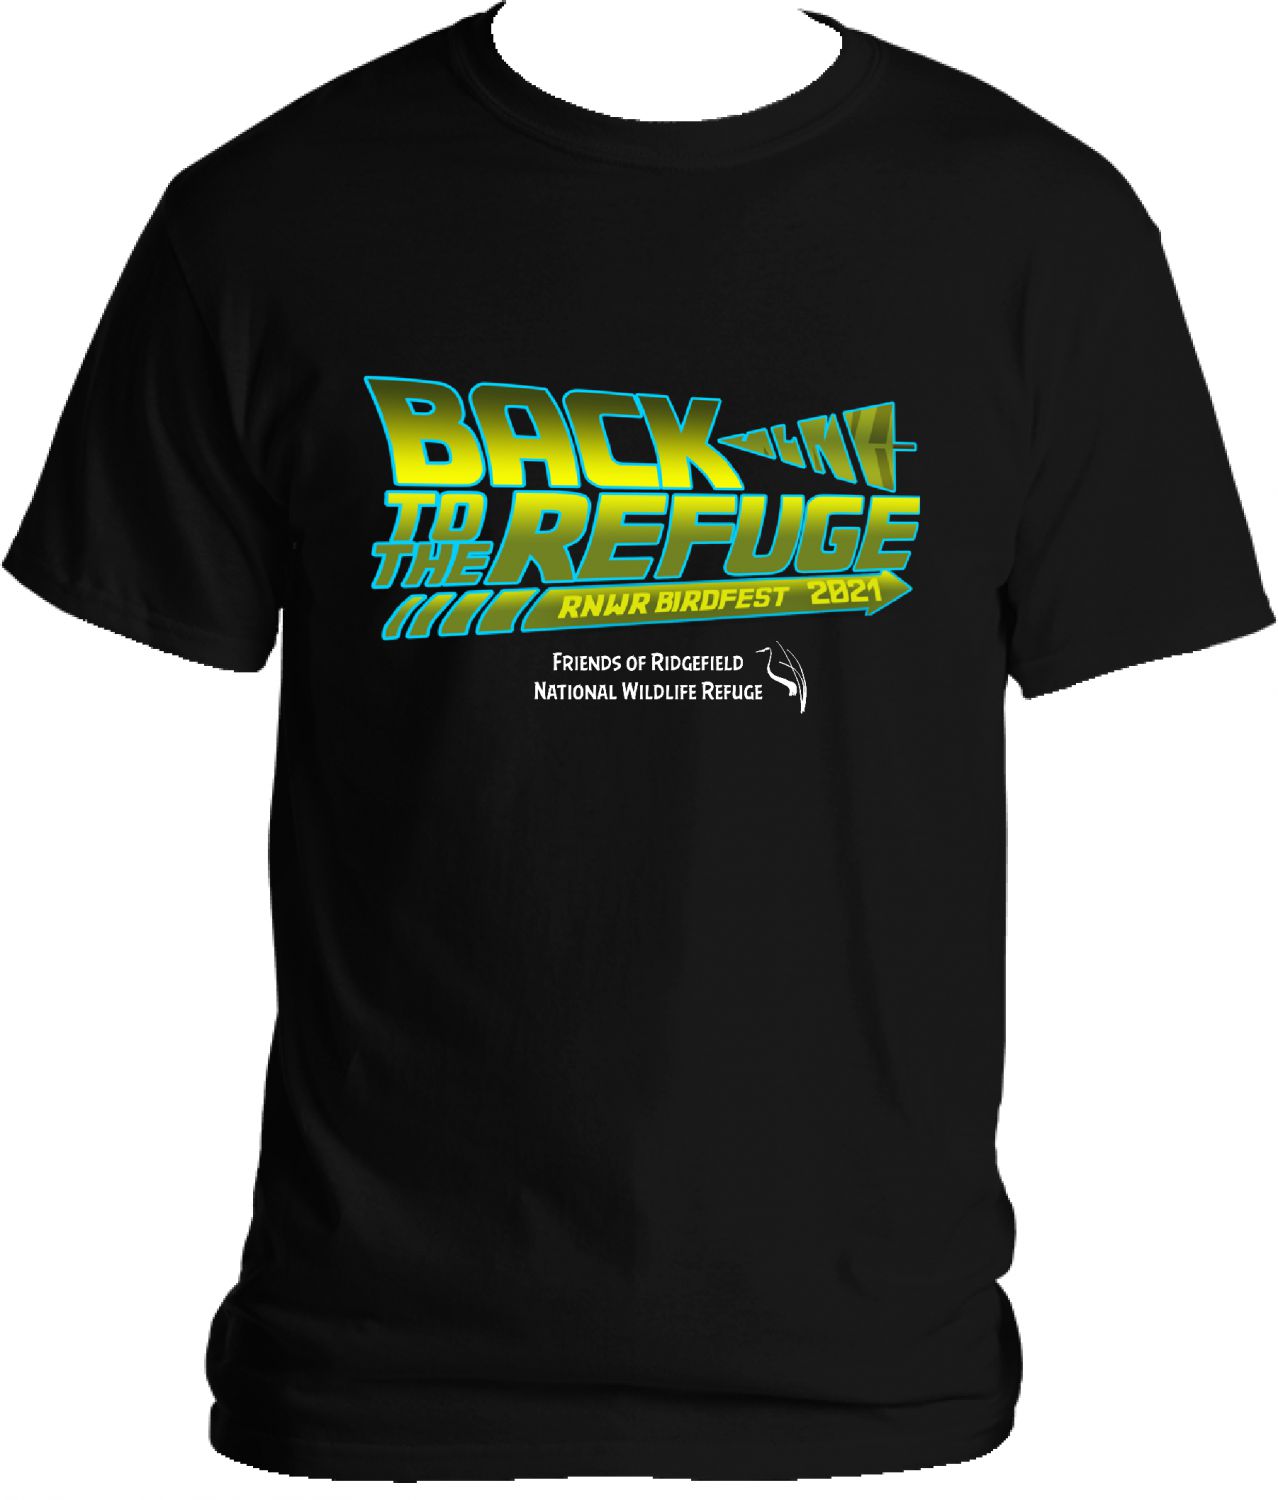 BFBG 2021 "Back to the Refuge" tee